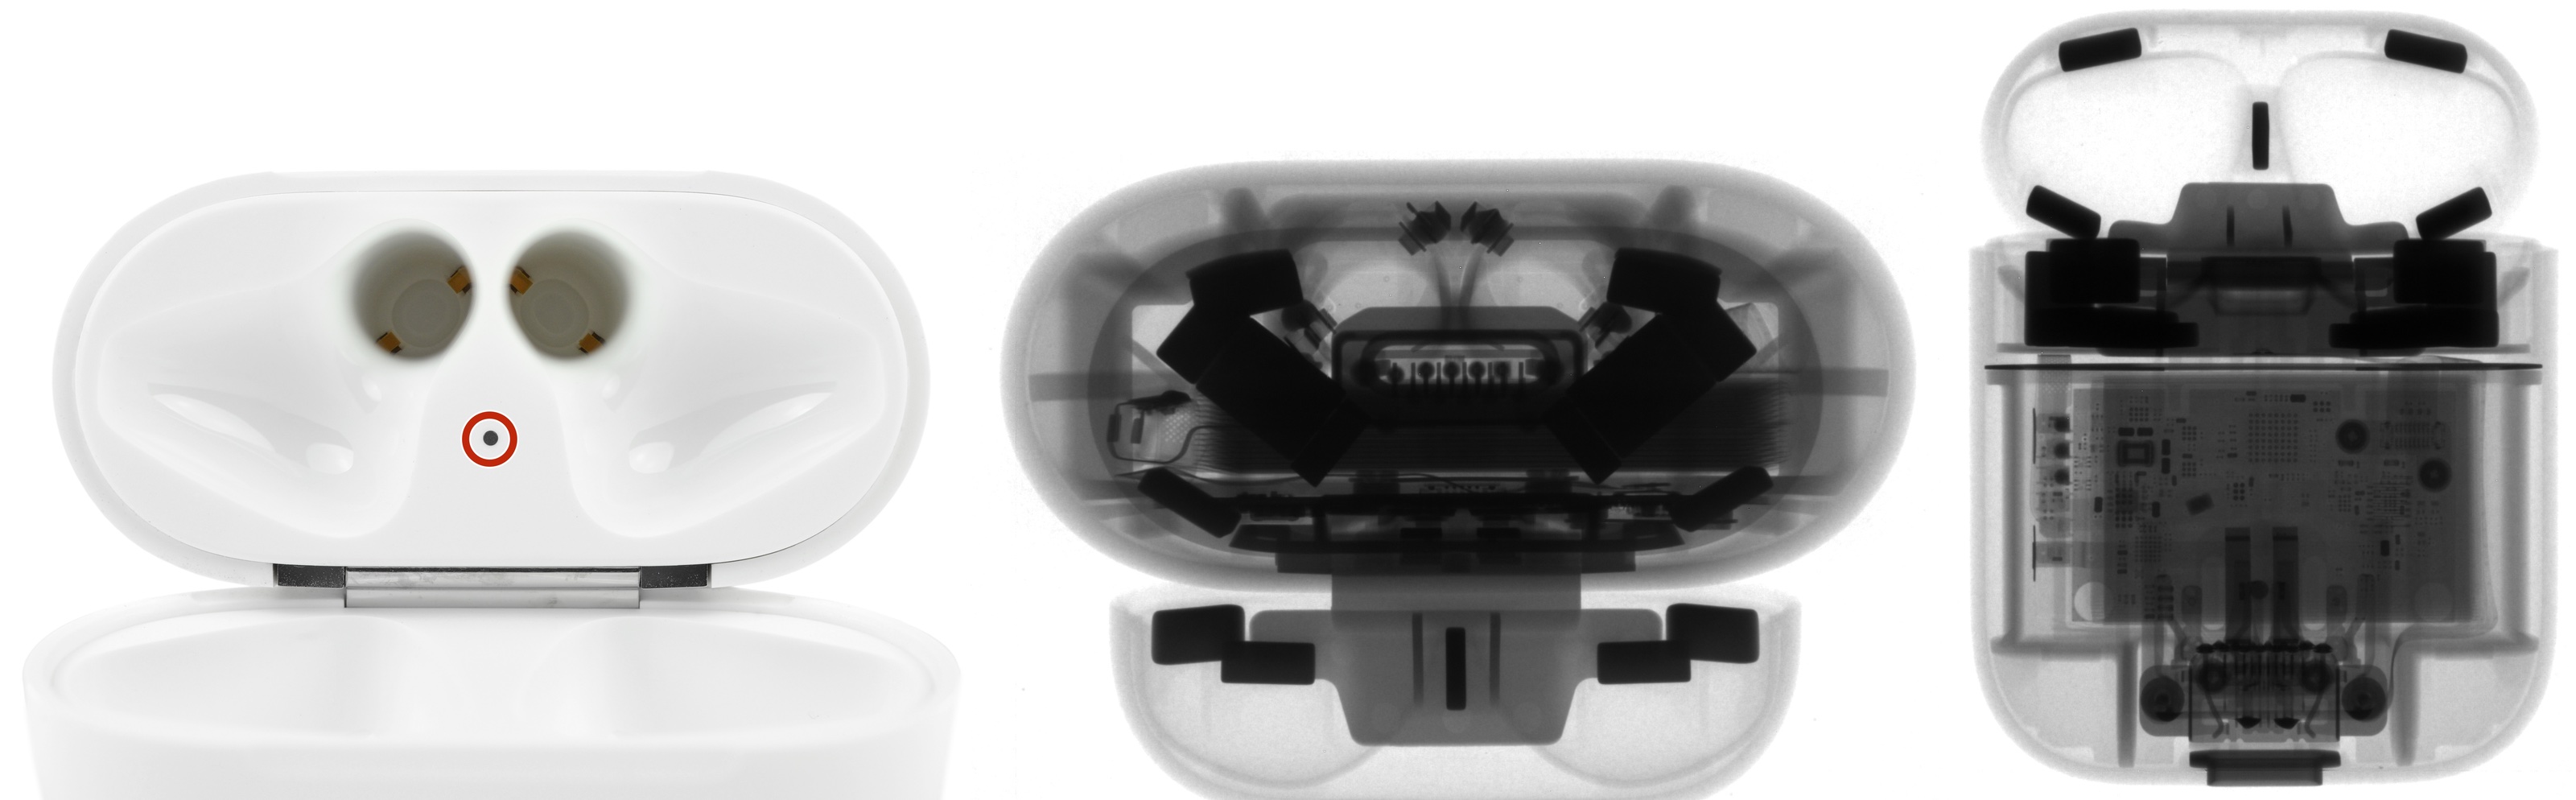 AirPods charging case iFixit image 004